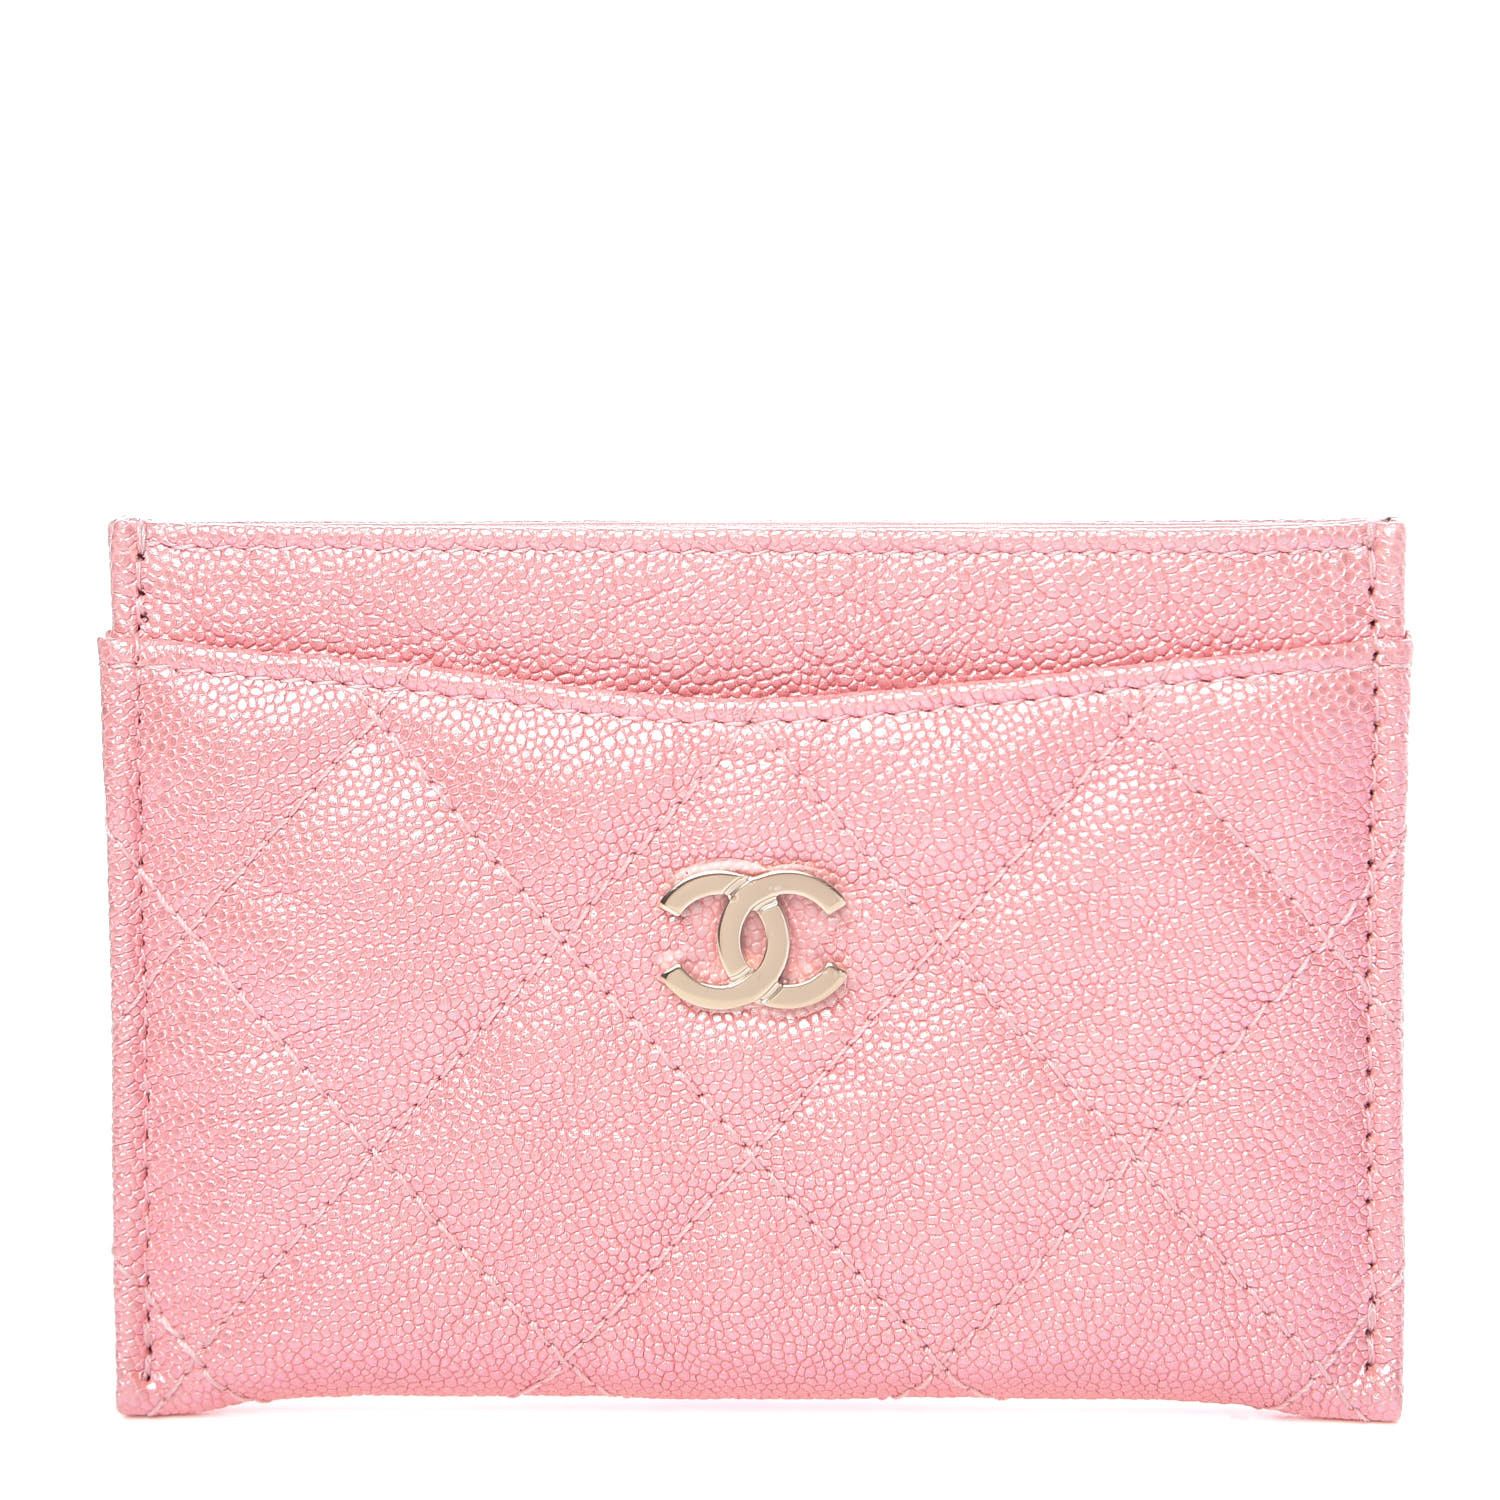 CHANEL Iridescent Caviar Quilted Card Holder Rose Pink | Fashionphile